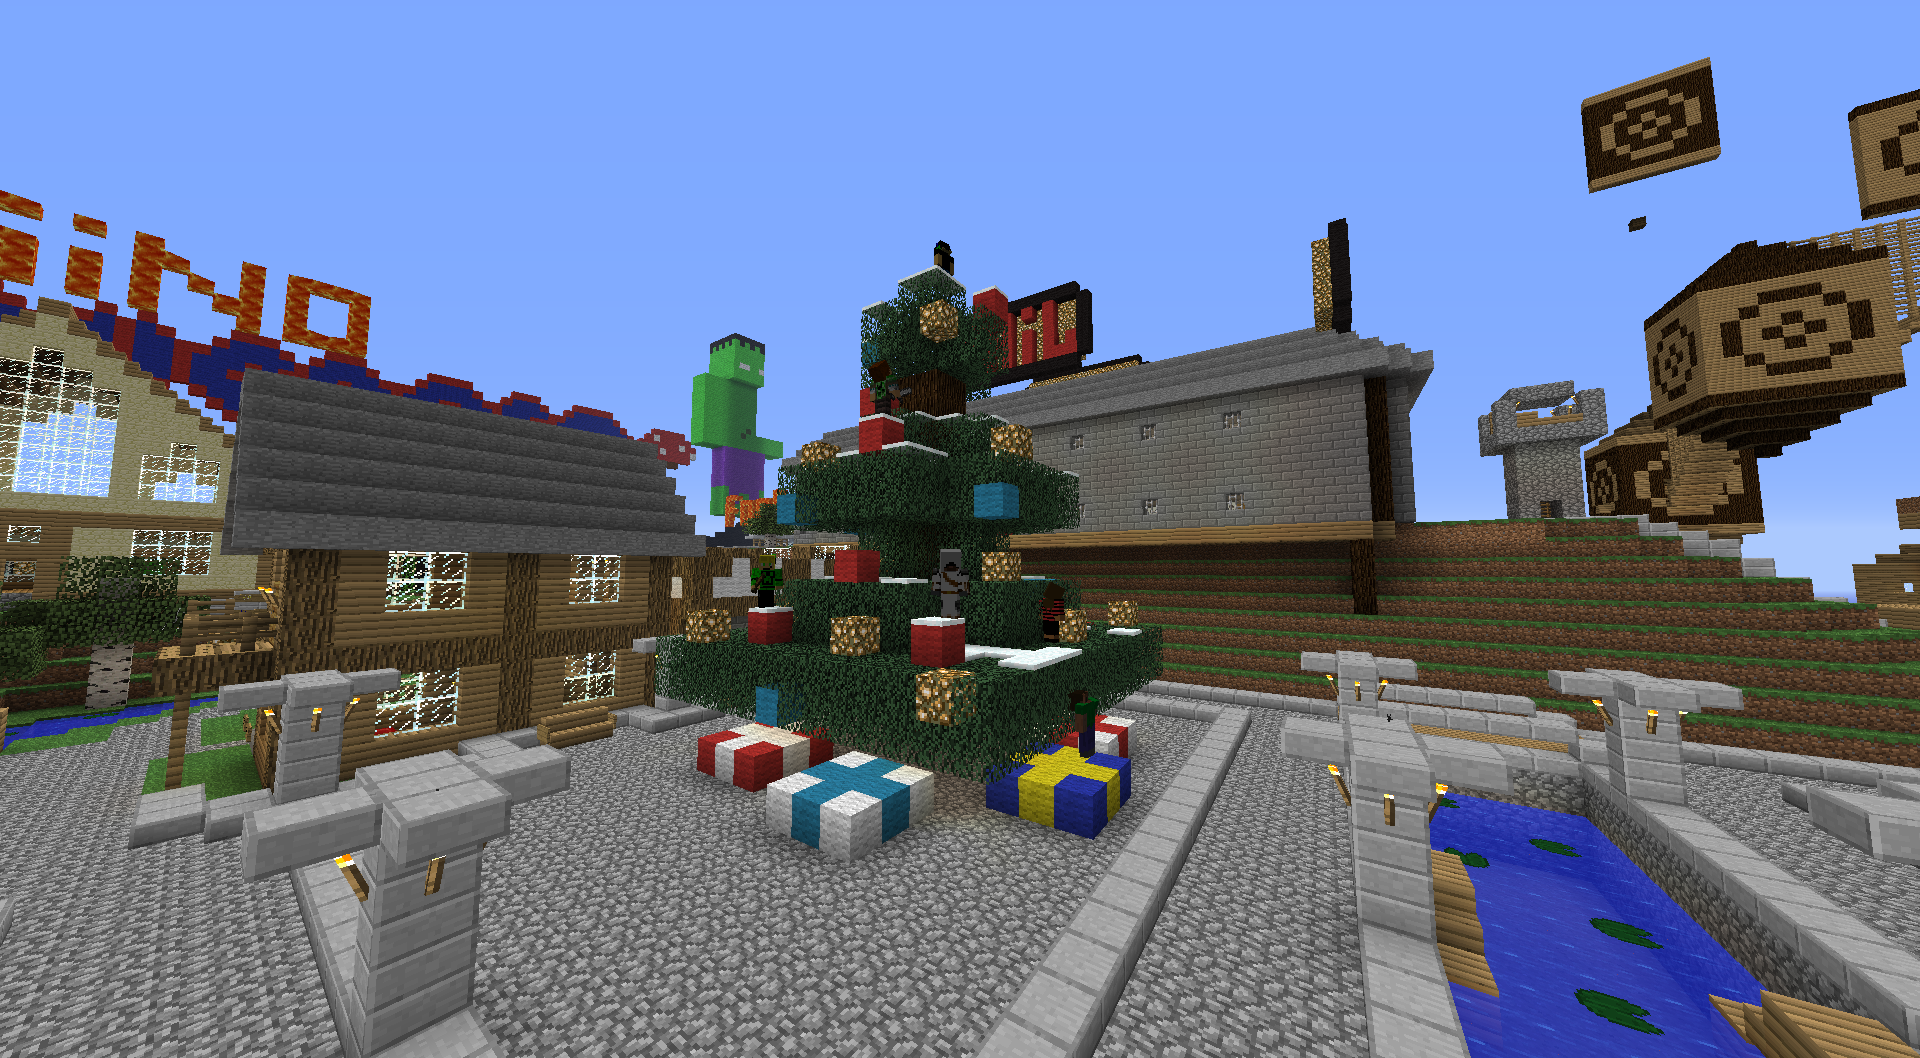 Picture of a christmas tree from the minecraft server MuCraft year 2012